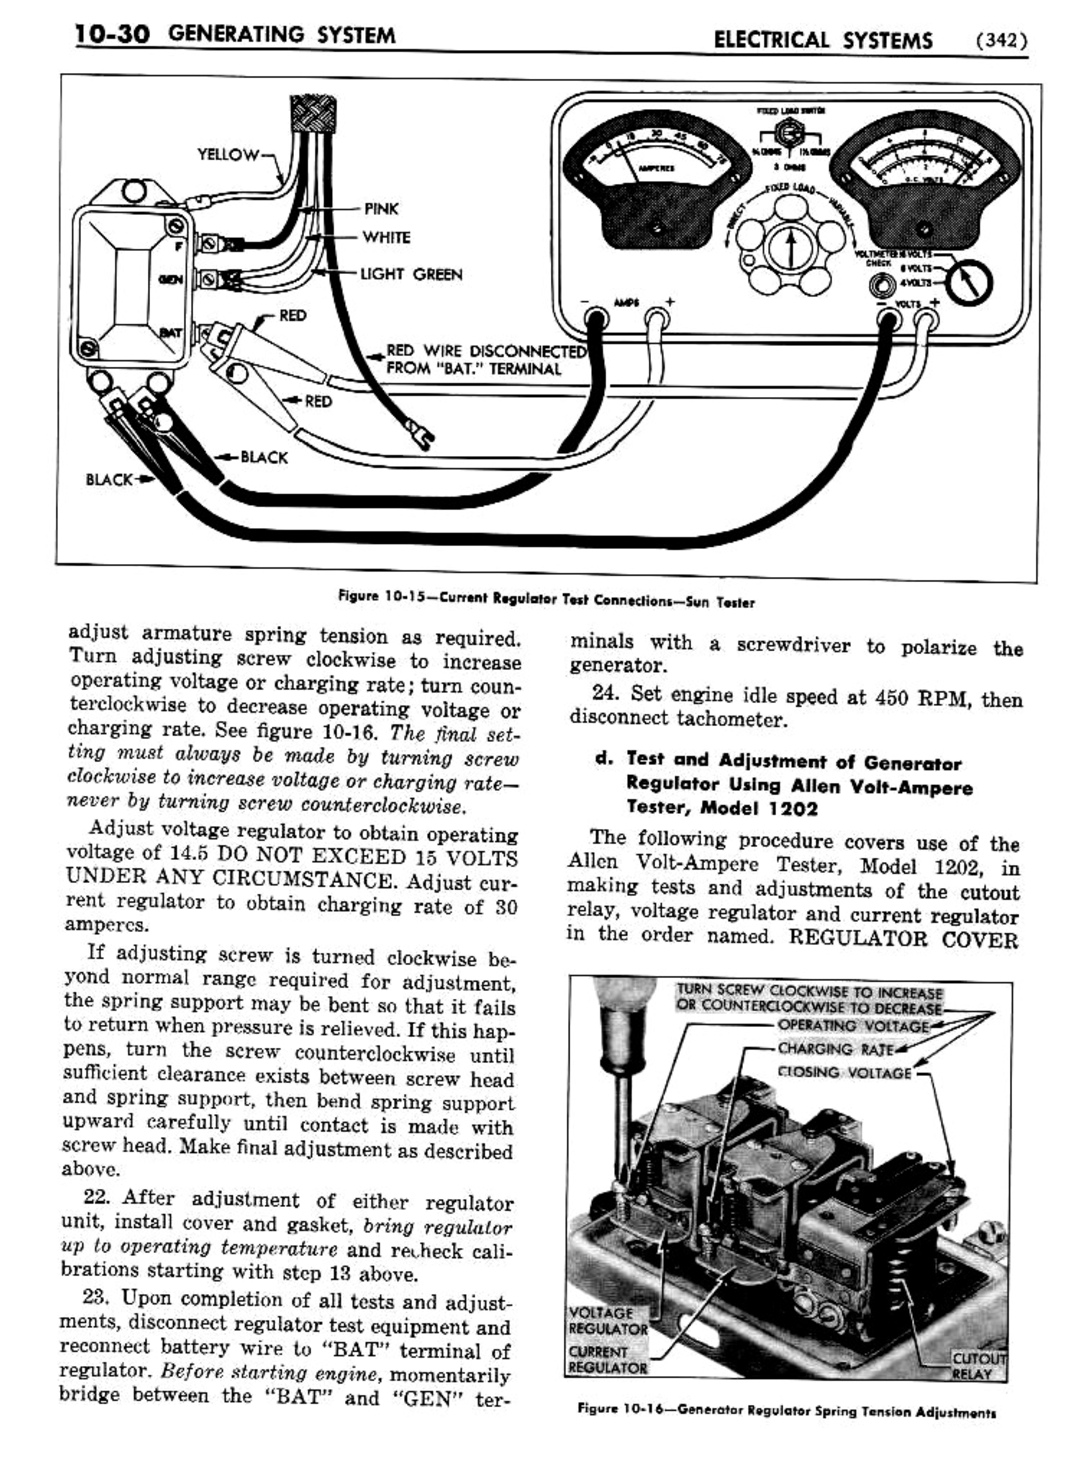 n_11 1954 Buick Shop Manual - Electrical Systems-030-030.jpg